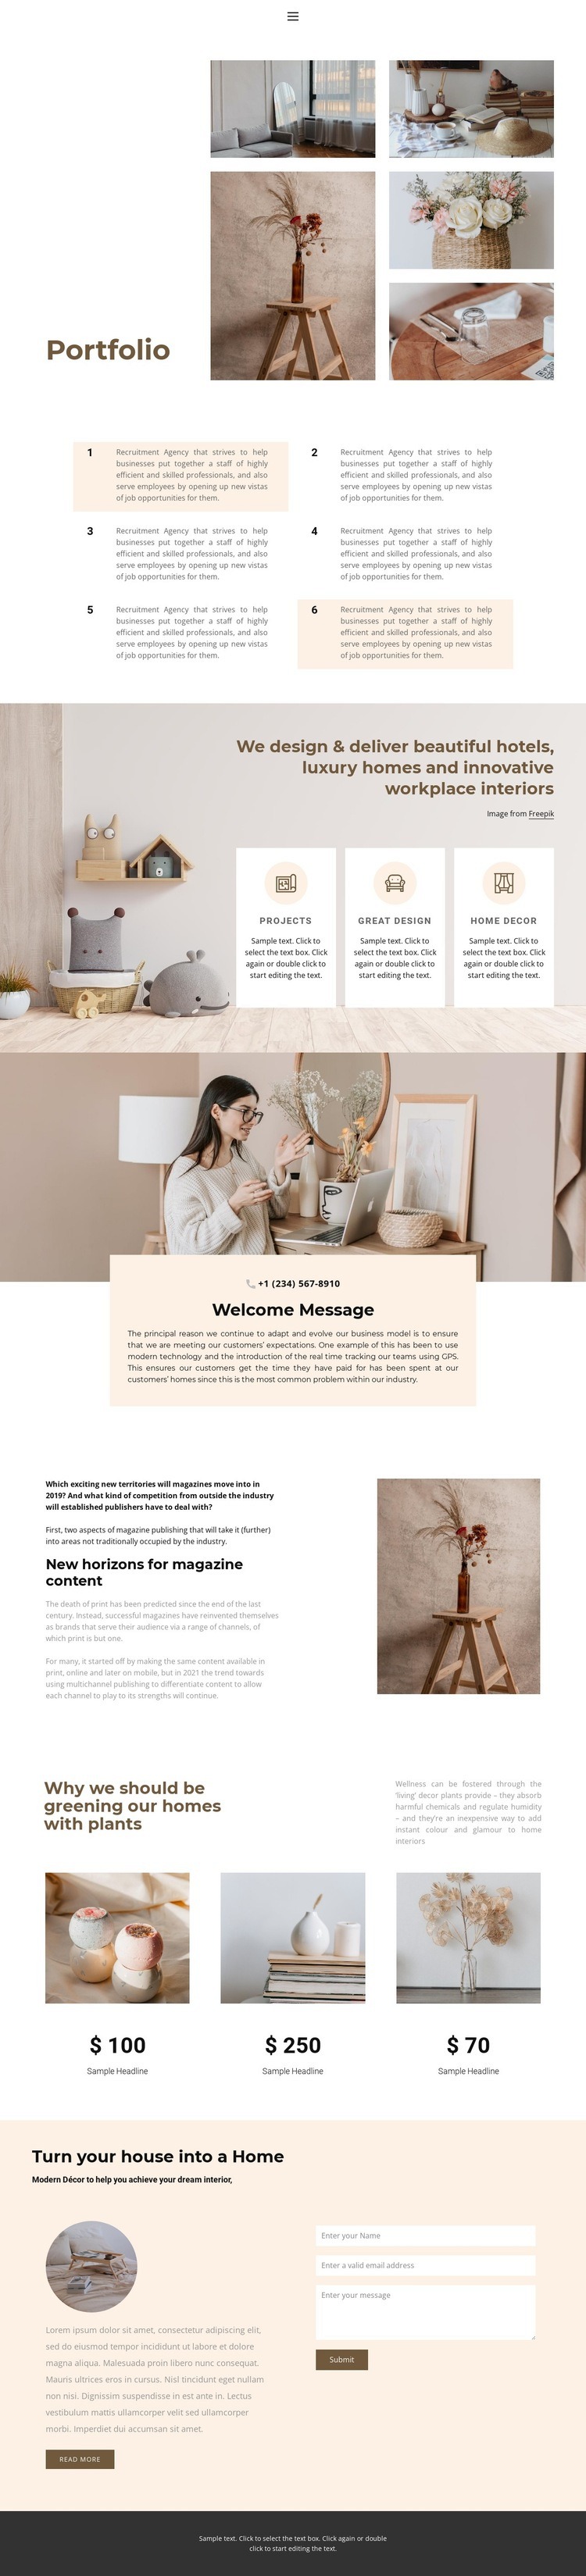 Decorate your home Homepage Design